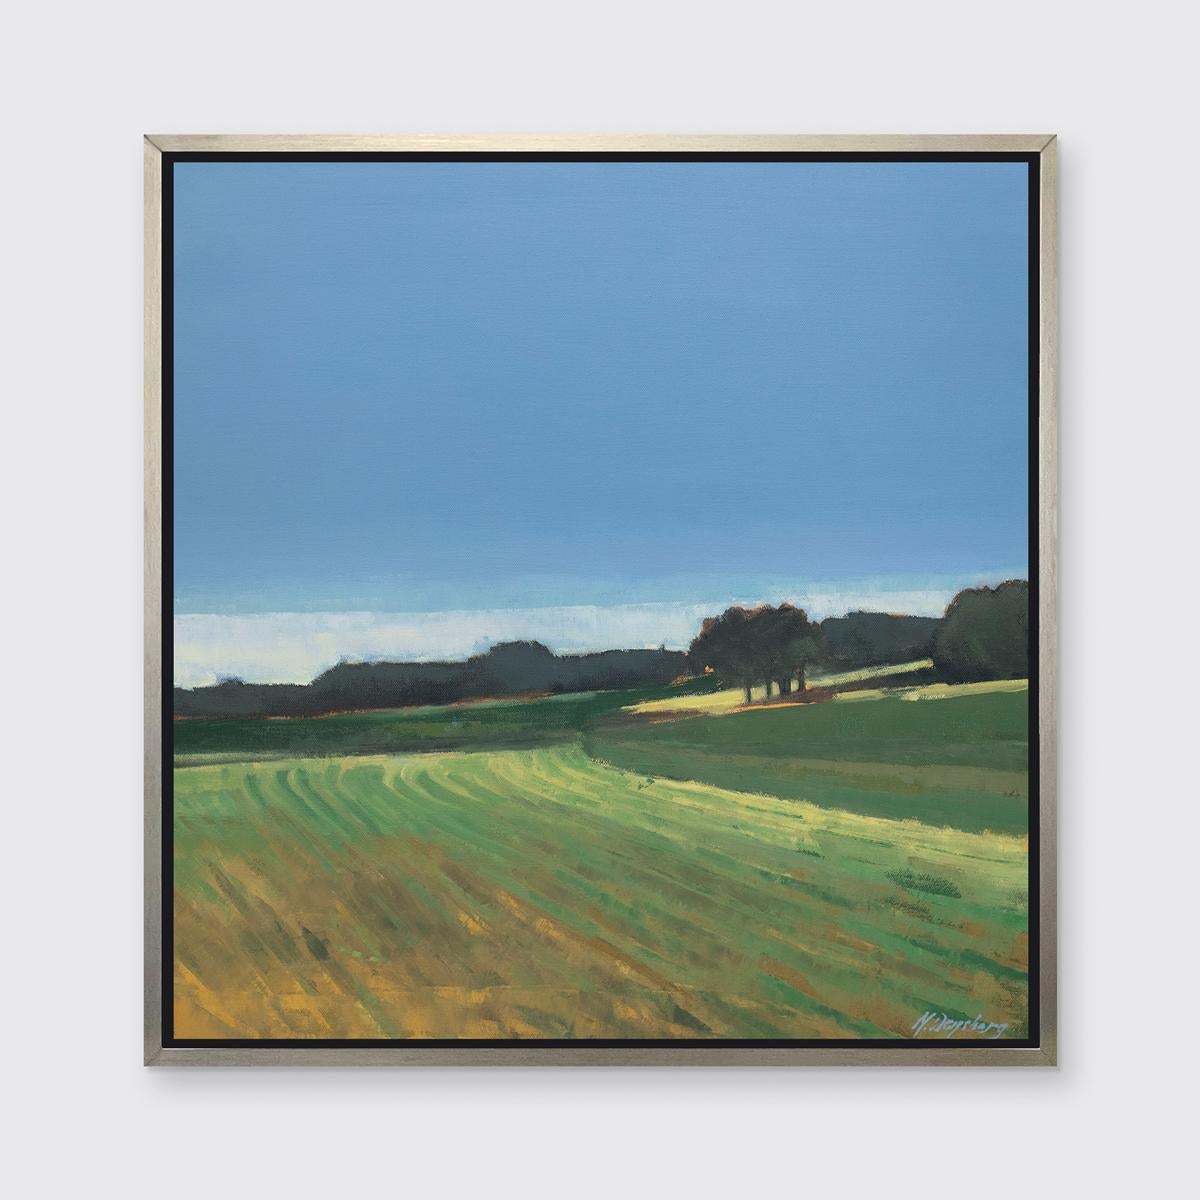 Molly Doe Wensberg Landscape Print - "Cropped Fields" Framed Limited Edition Print, 48" x 48"